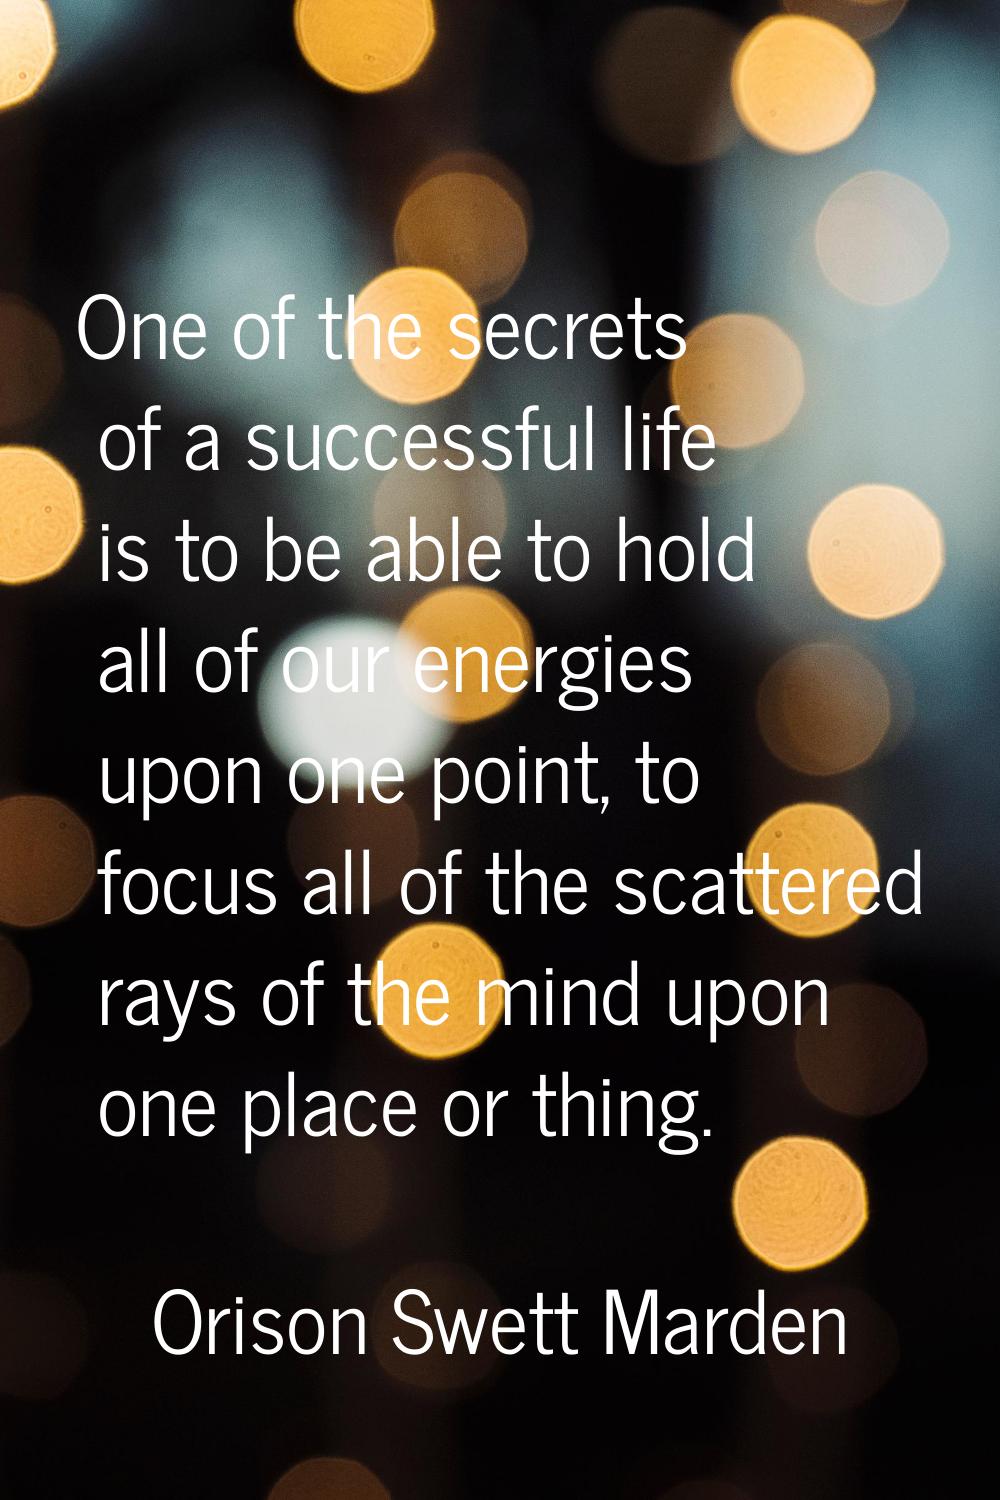 One of the secrets of a successful life is to be able to hold all of our energies upon one point, t